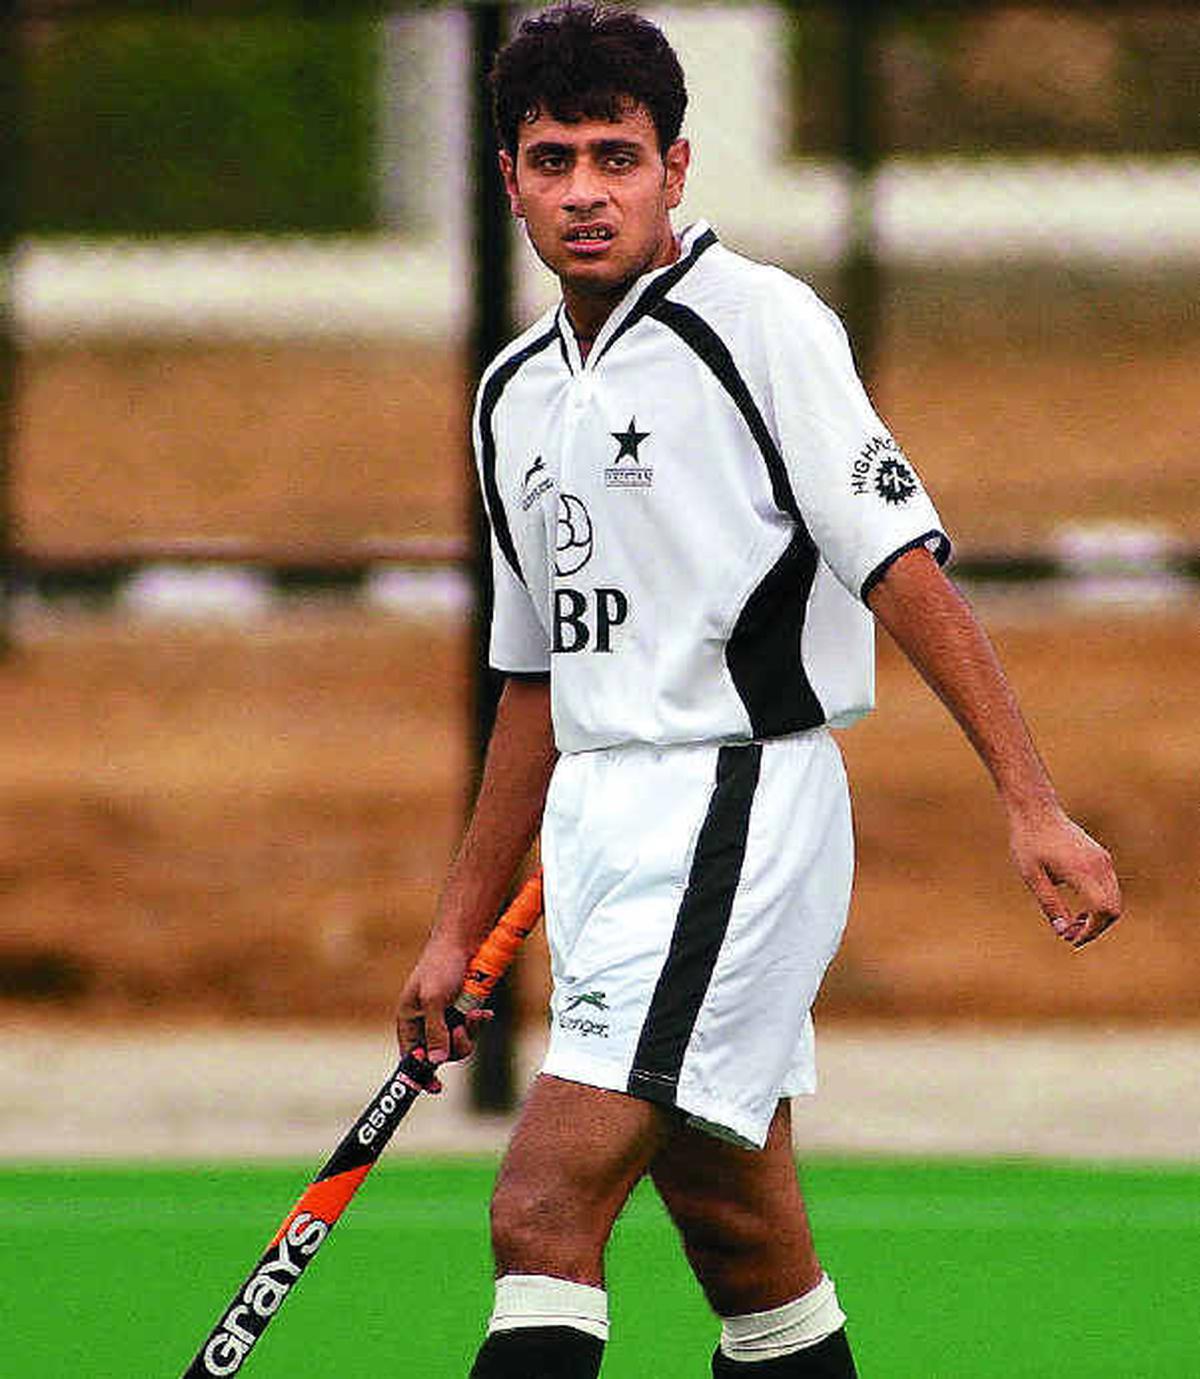 Rehan Butt of Pakistan at the 1st Afro Asian Games Hockey competition in Hyderabad.